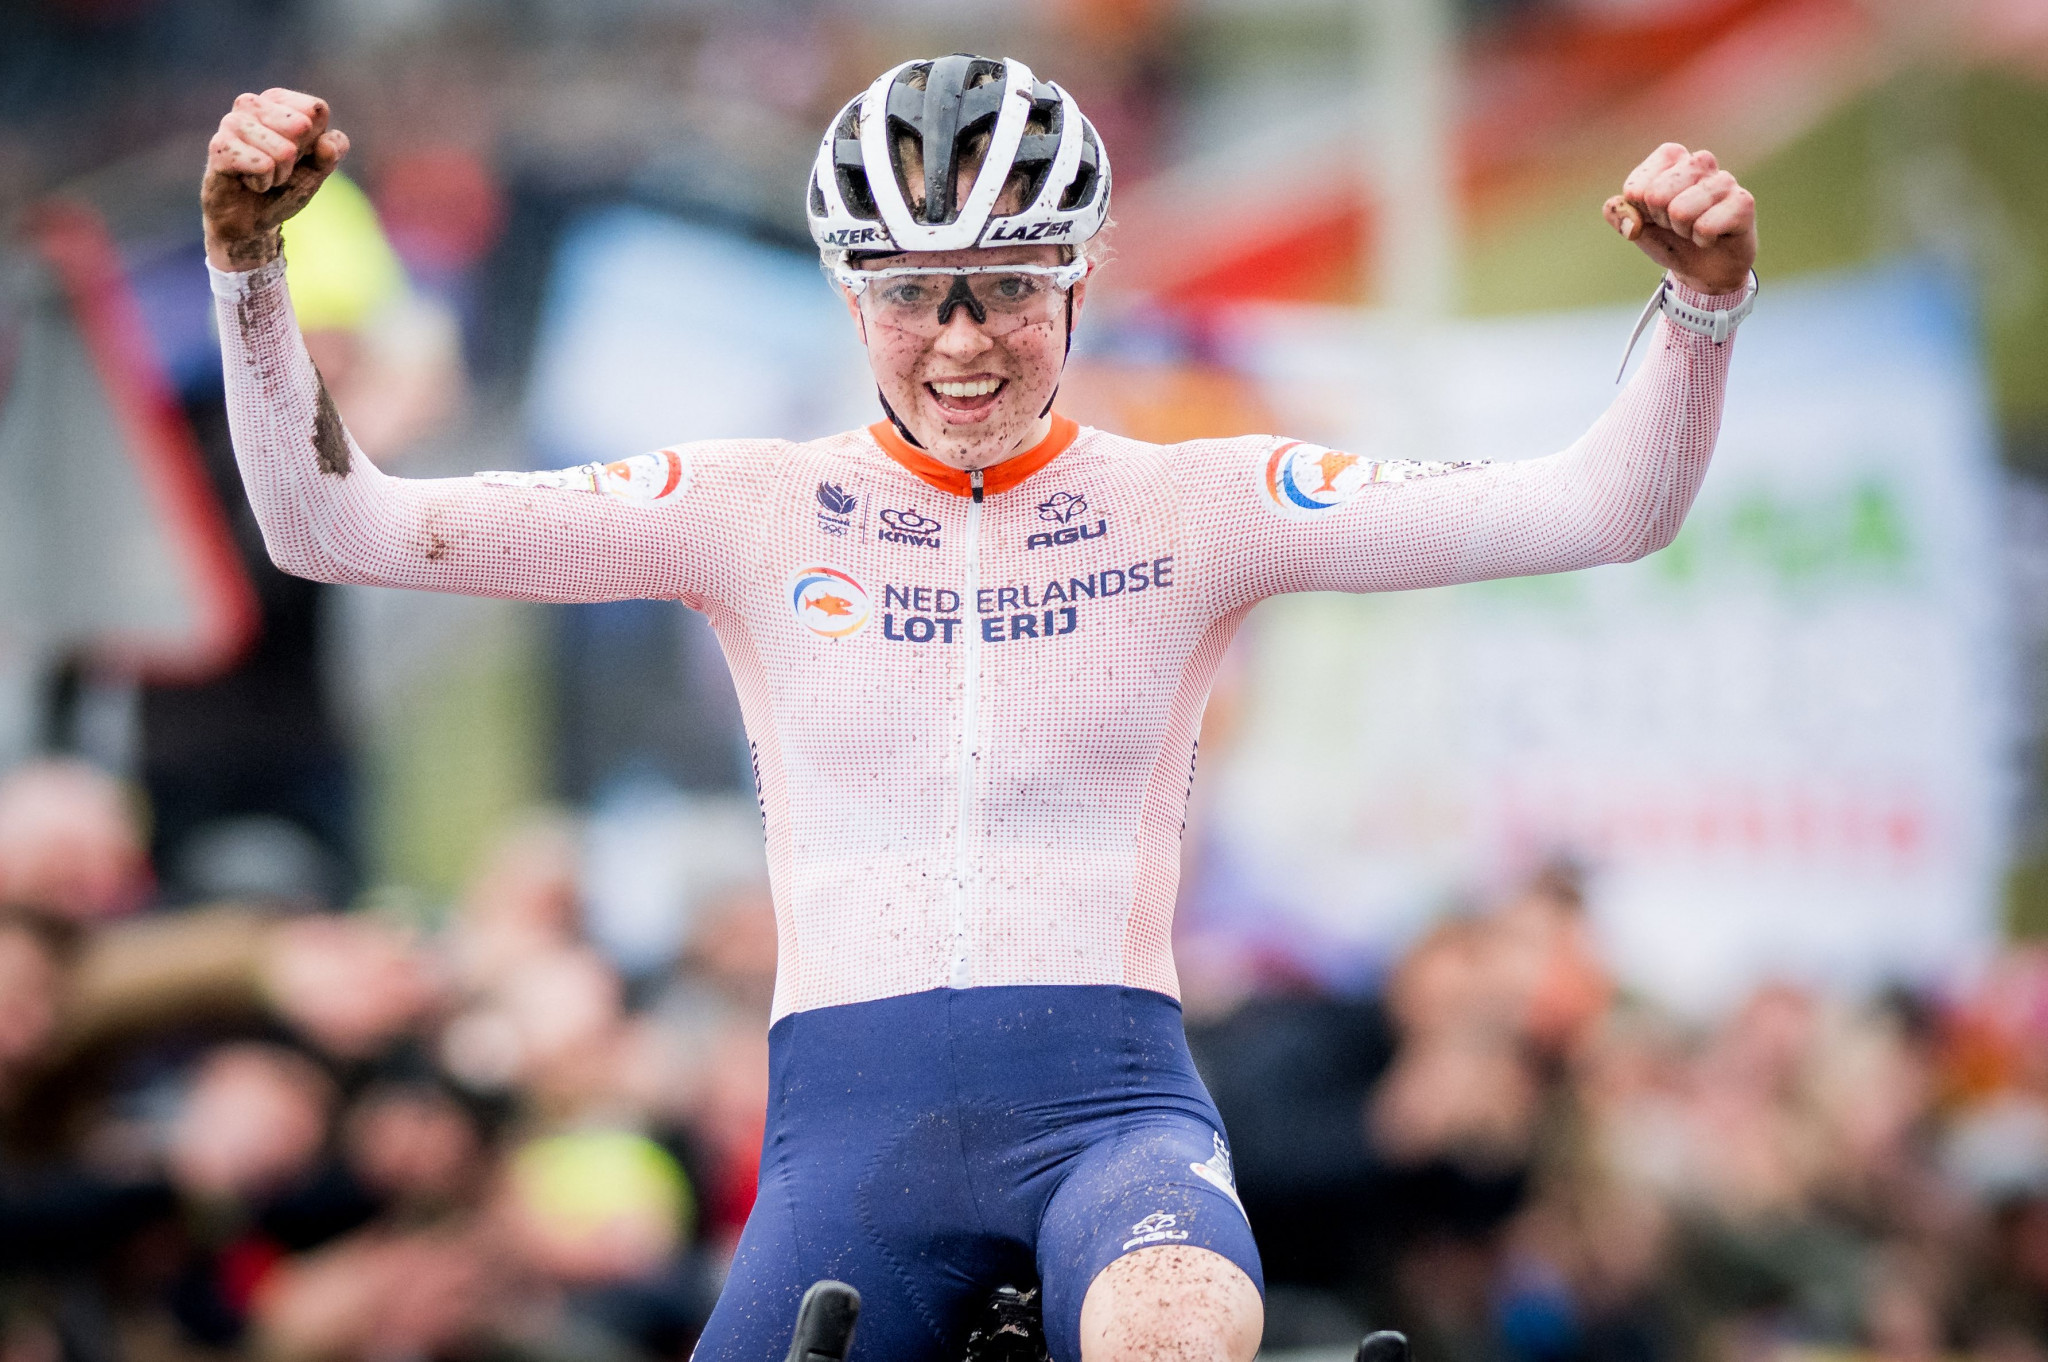 Fem van Empel led a Dutch podium sweep and claimed the rainbow jersey by winning the women's elite race in Hoogerheide ©Getty Images